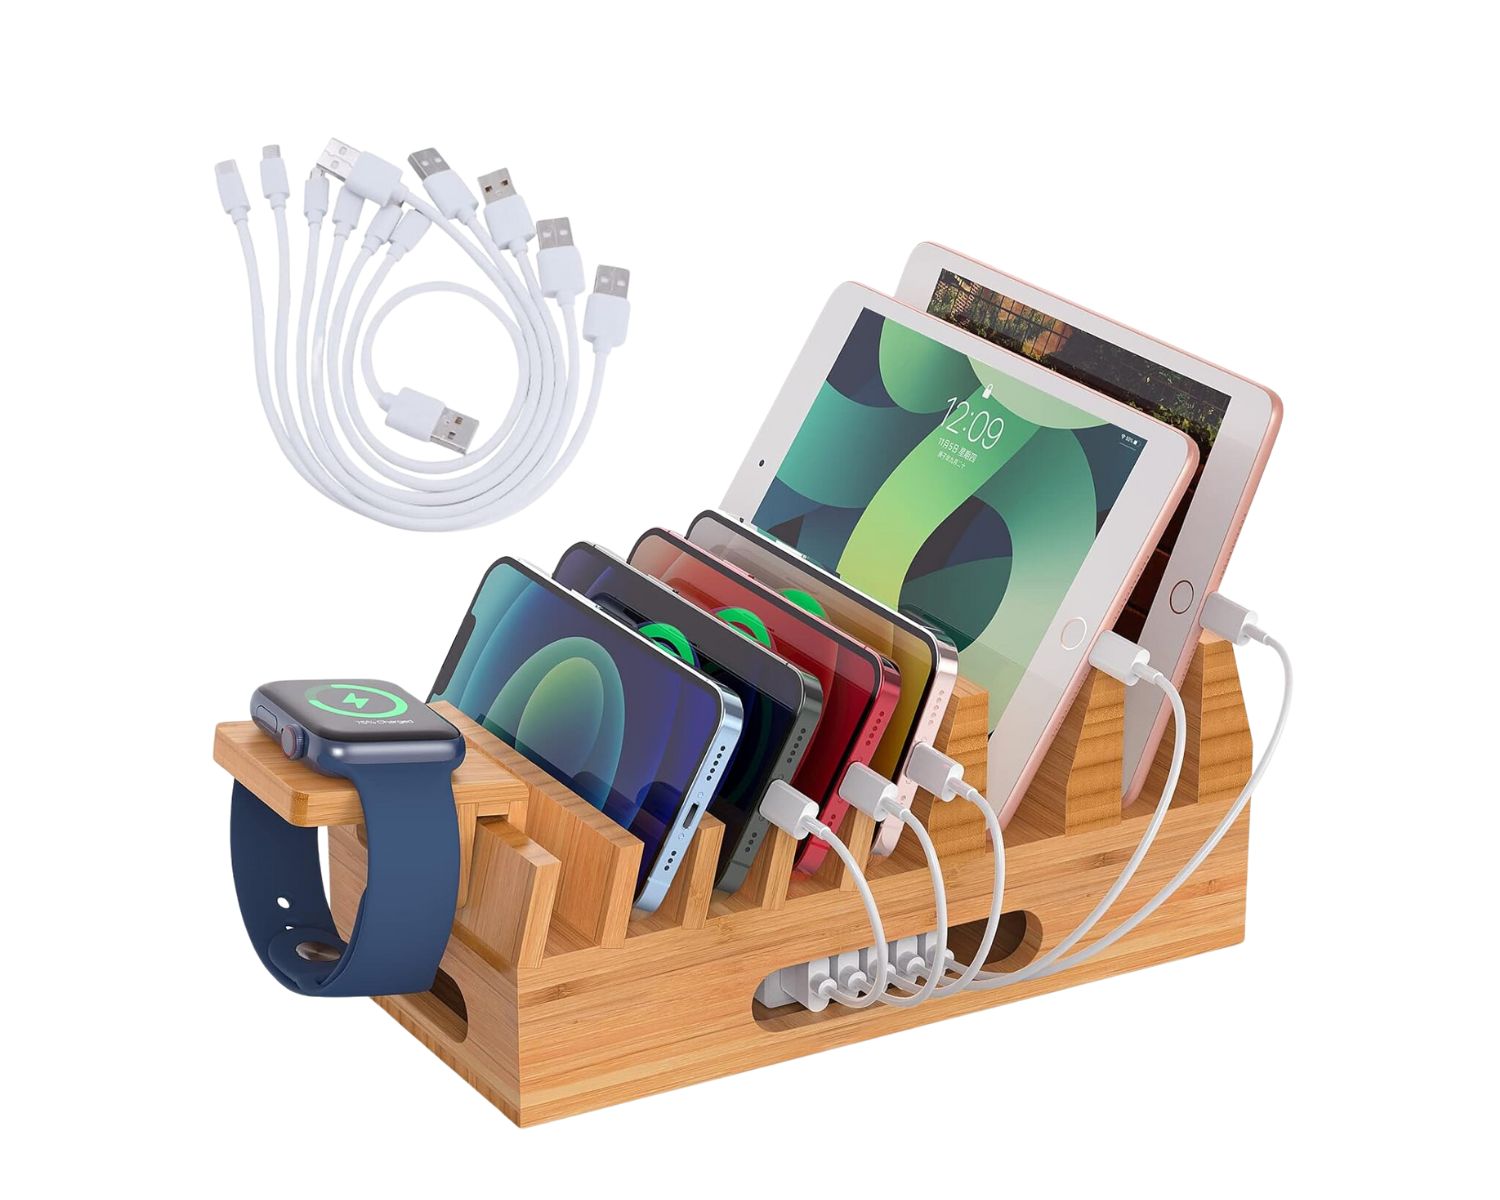 Stay Powered Up with the Soopii 6-Port Phone Charging Station